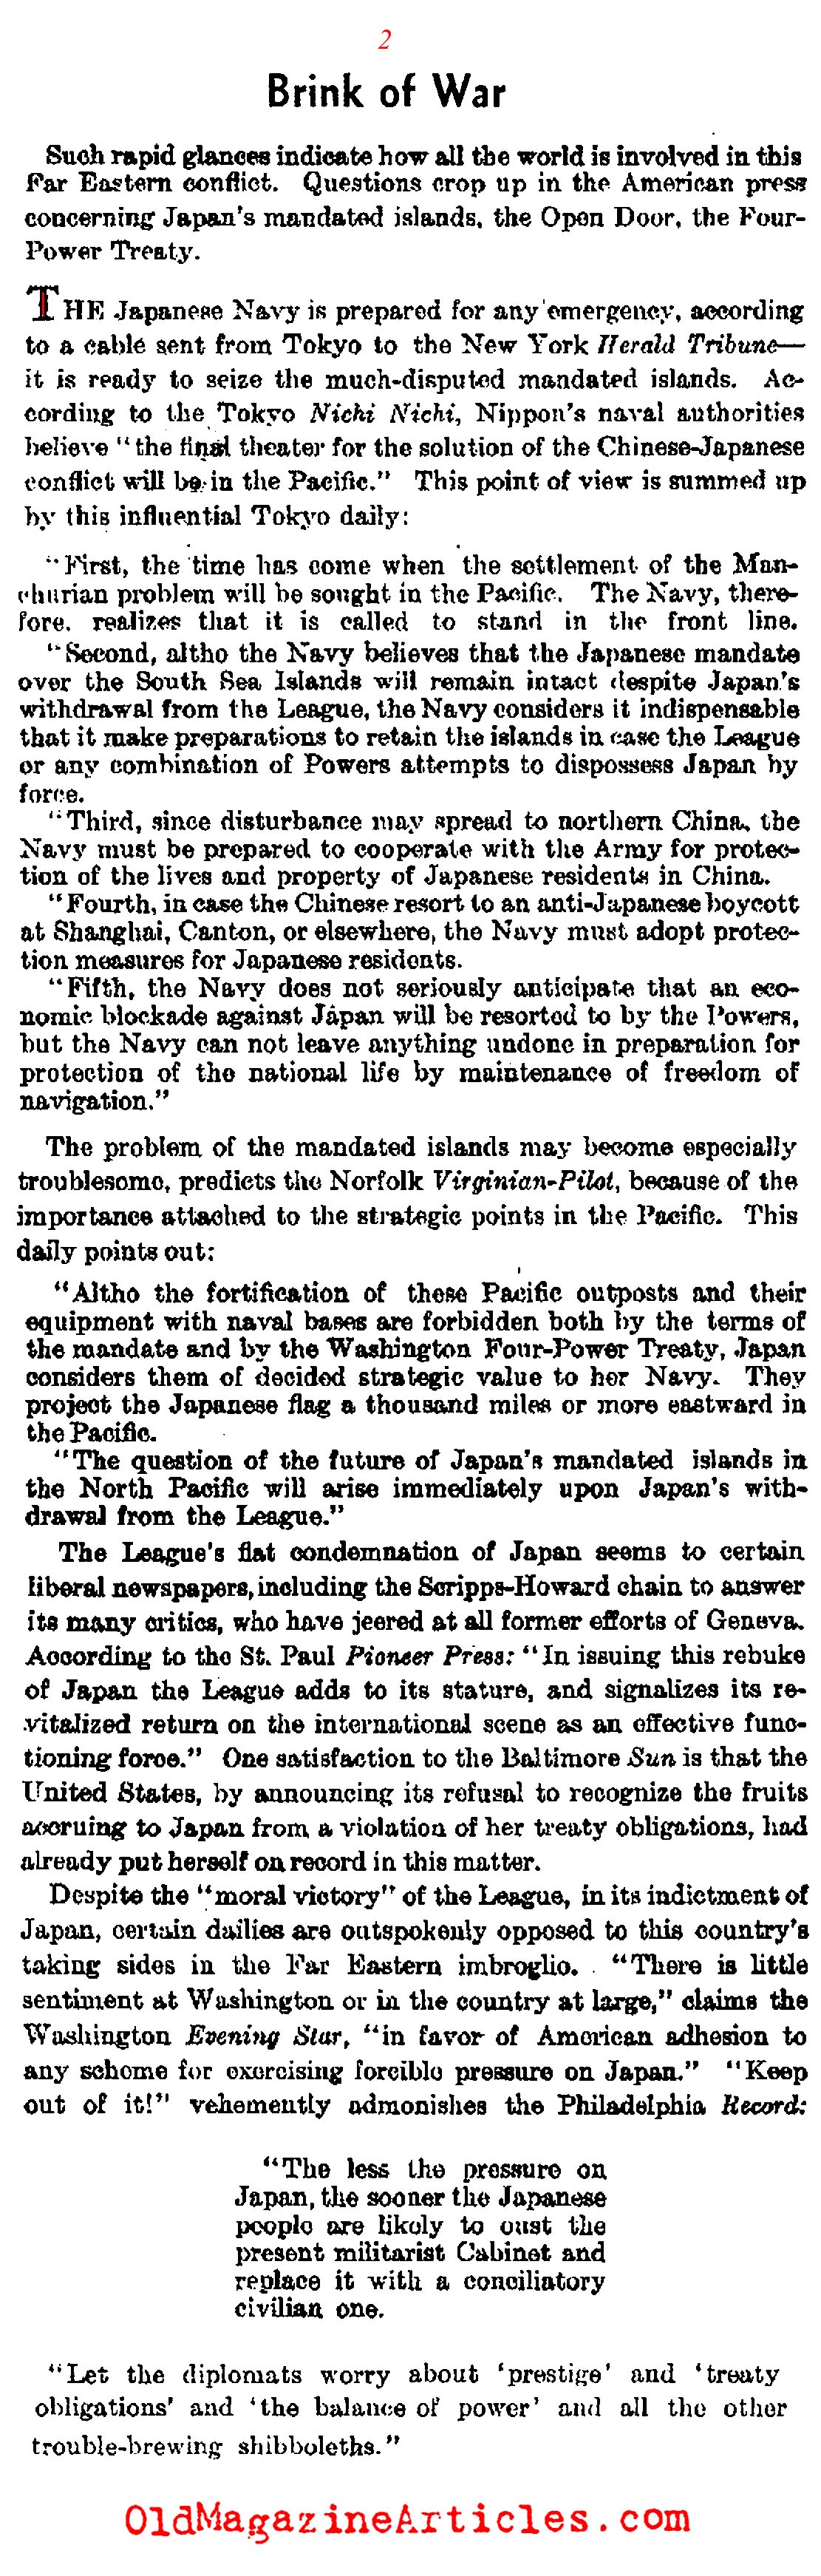 Japan and the Road to War (Literary Digest, 1933)